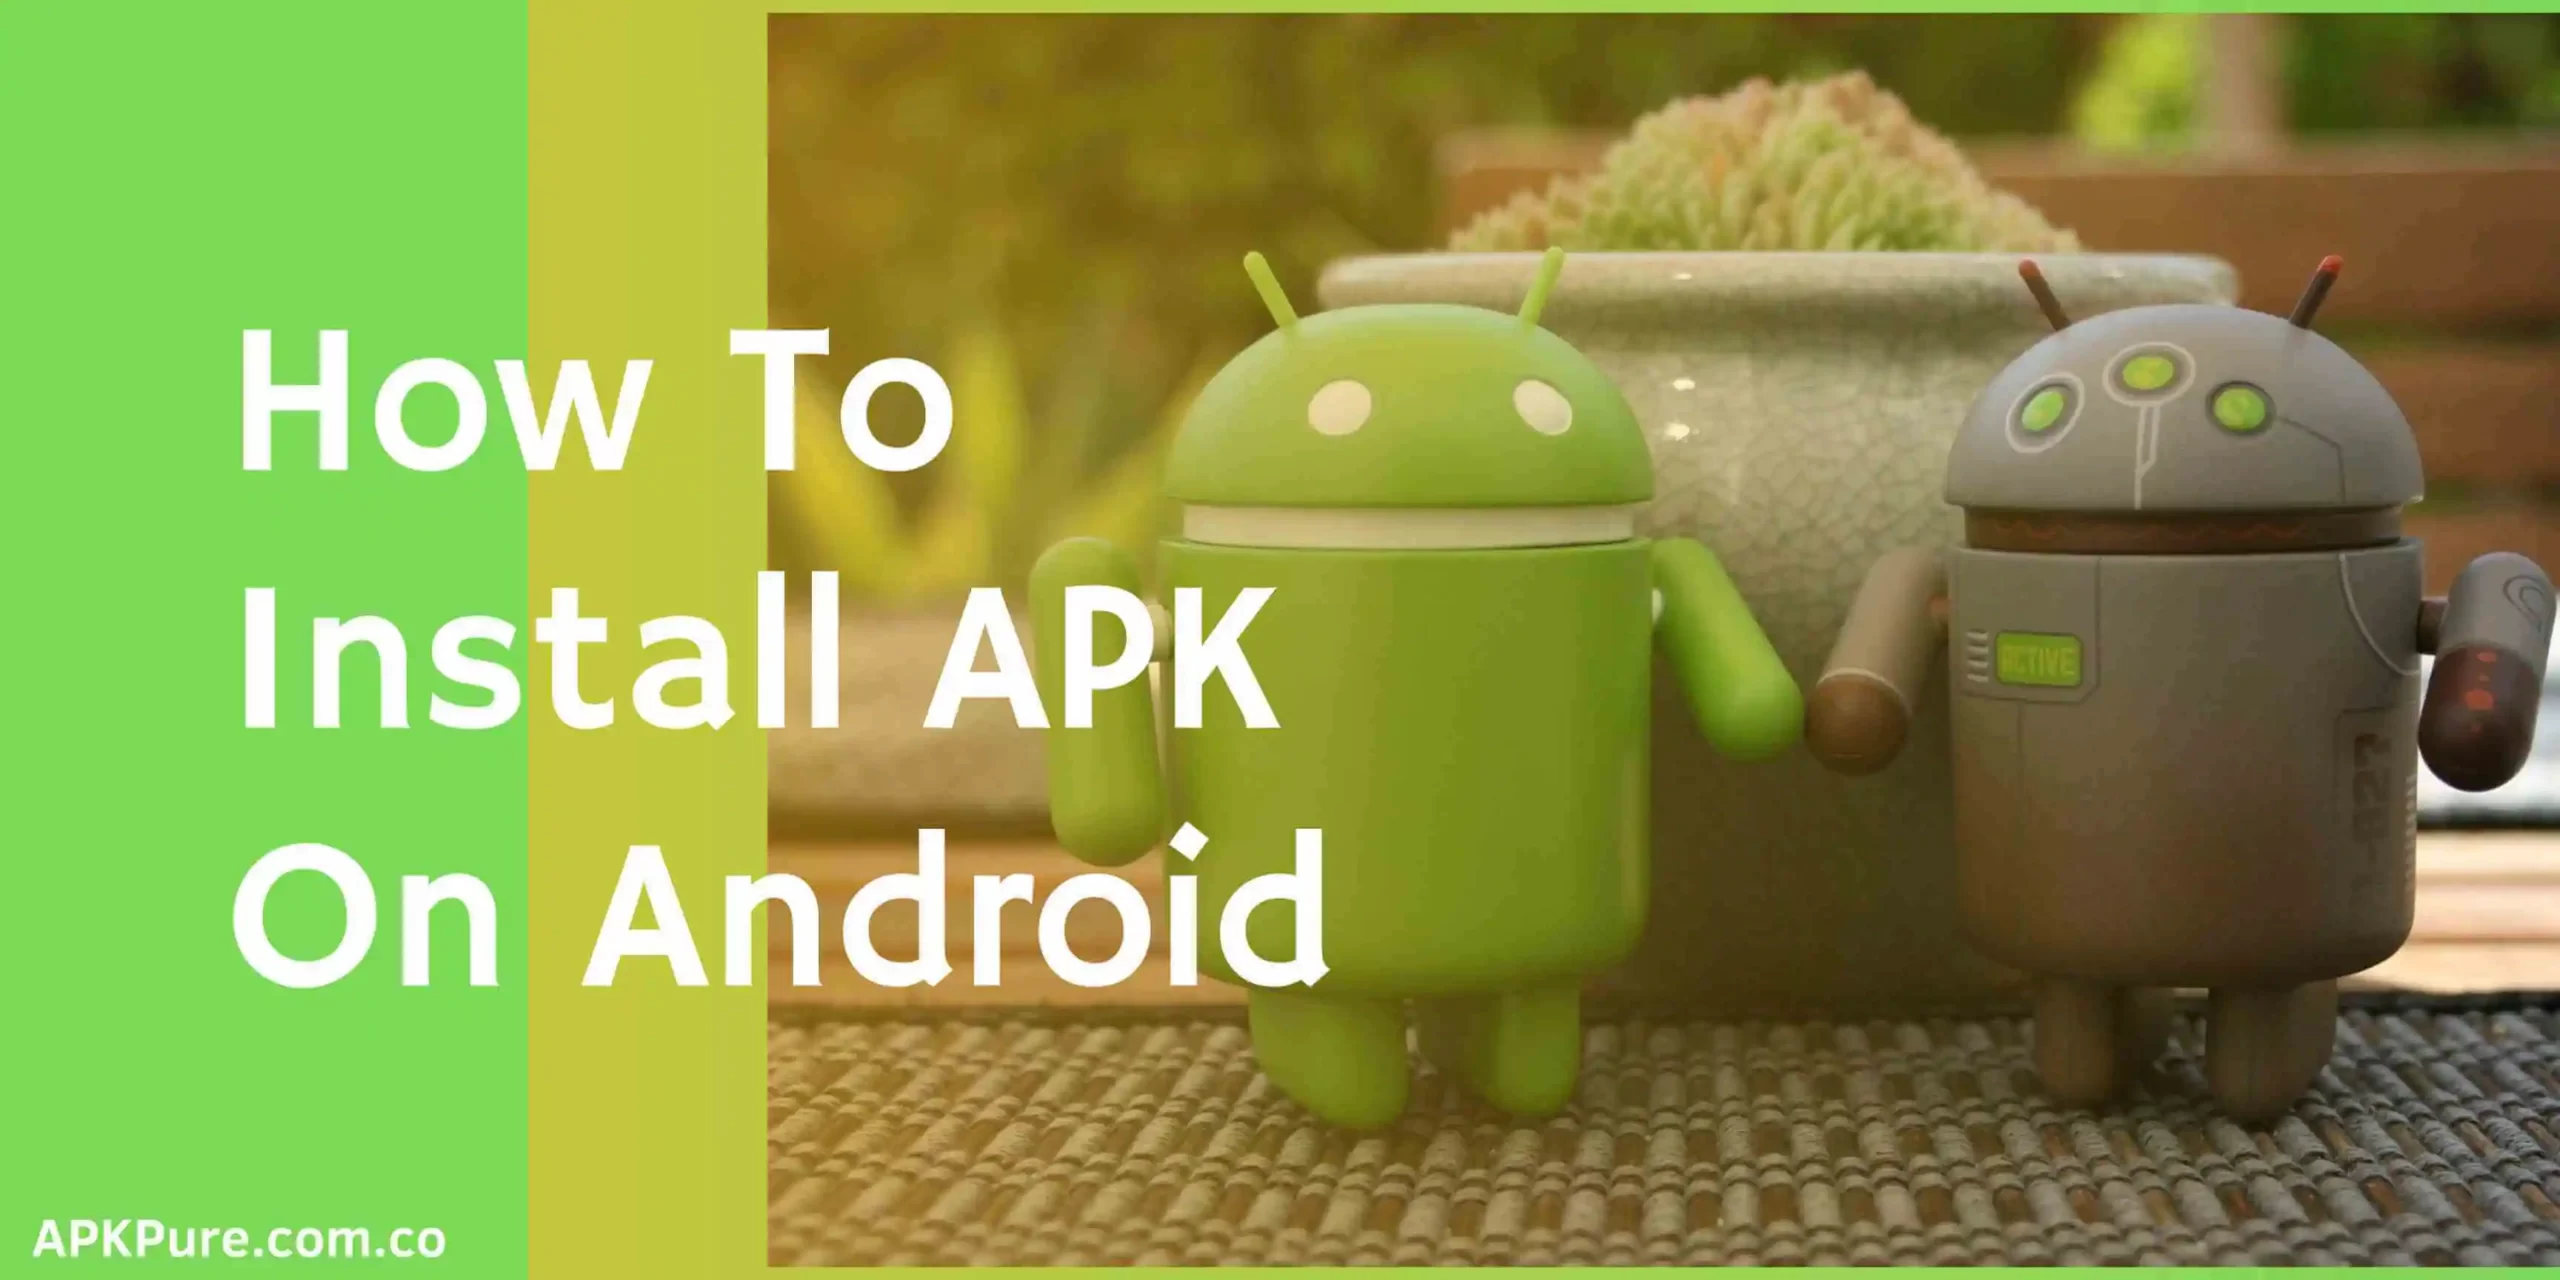 How to Install APK on Your Android Device